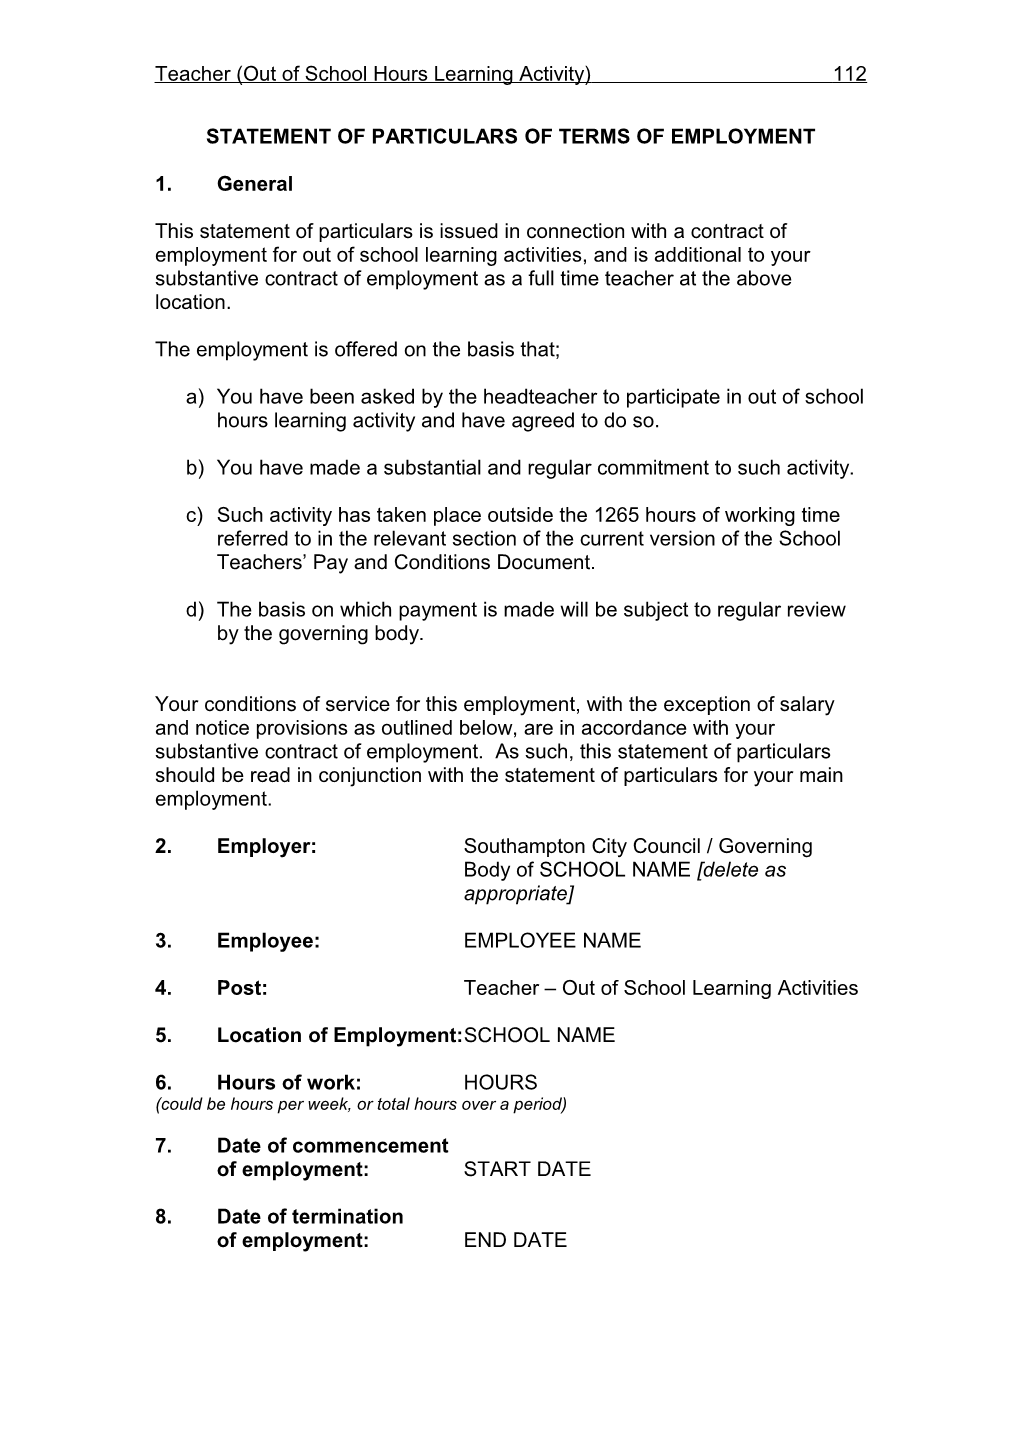 Statement of Particulars of Terms of Employment